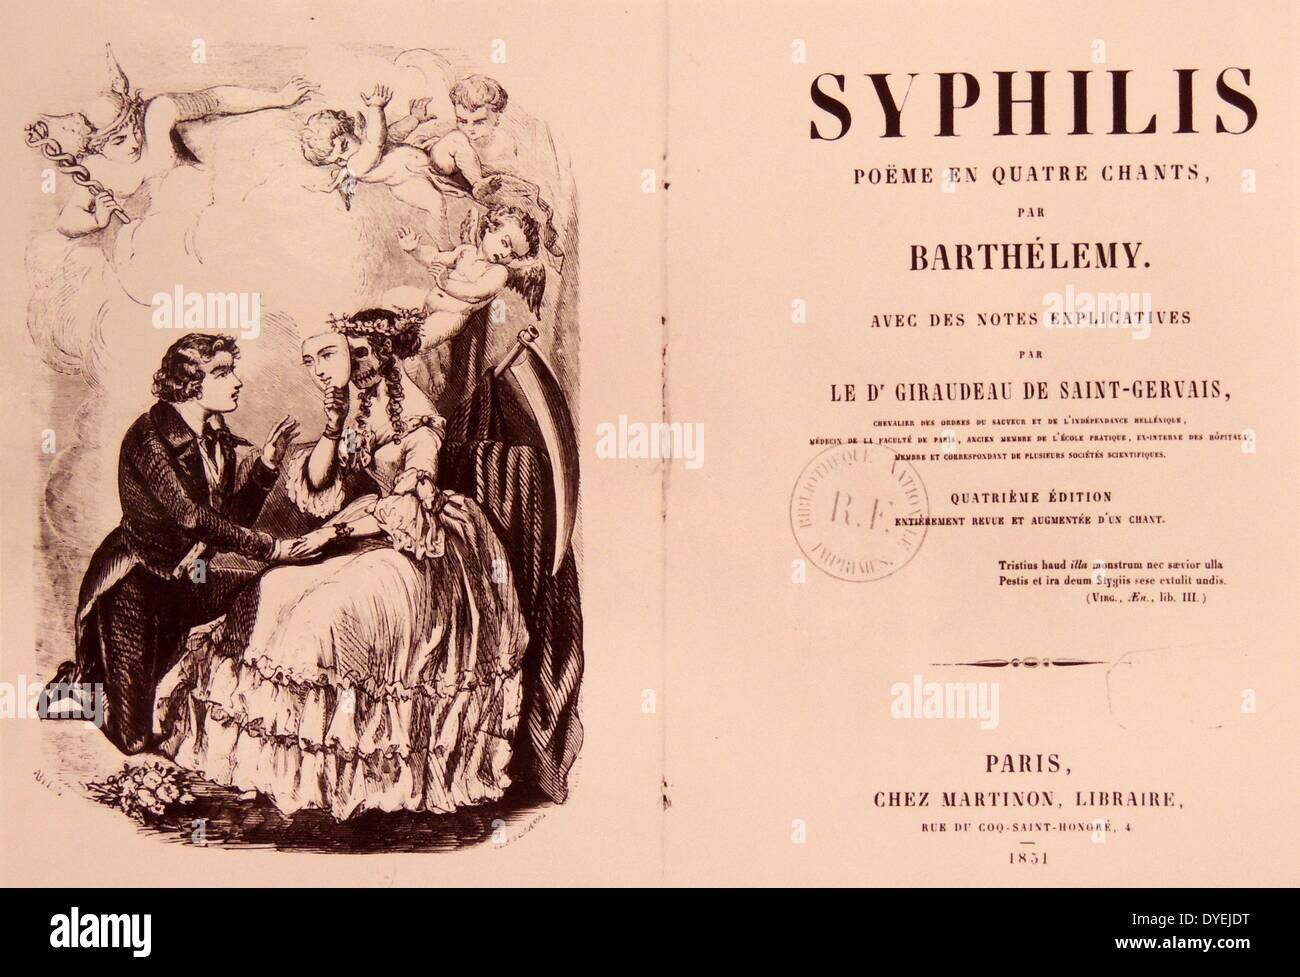 Syphilis : poëme en quatre chants (1851) by Barthélemy, 1796-1867; Fracastoro, Girolamo, 1478-1553. The history of syphilis has been well studied, but the exact origin of syphilis is unknown. There are two primary hypotheses: one proposes that syphilis was carried from the Americas to Europe by the crew of Christopher Columbus, the other proposes that syphilis previously existed in Europe but went unrecognized Stock Photo